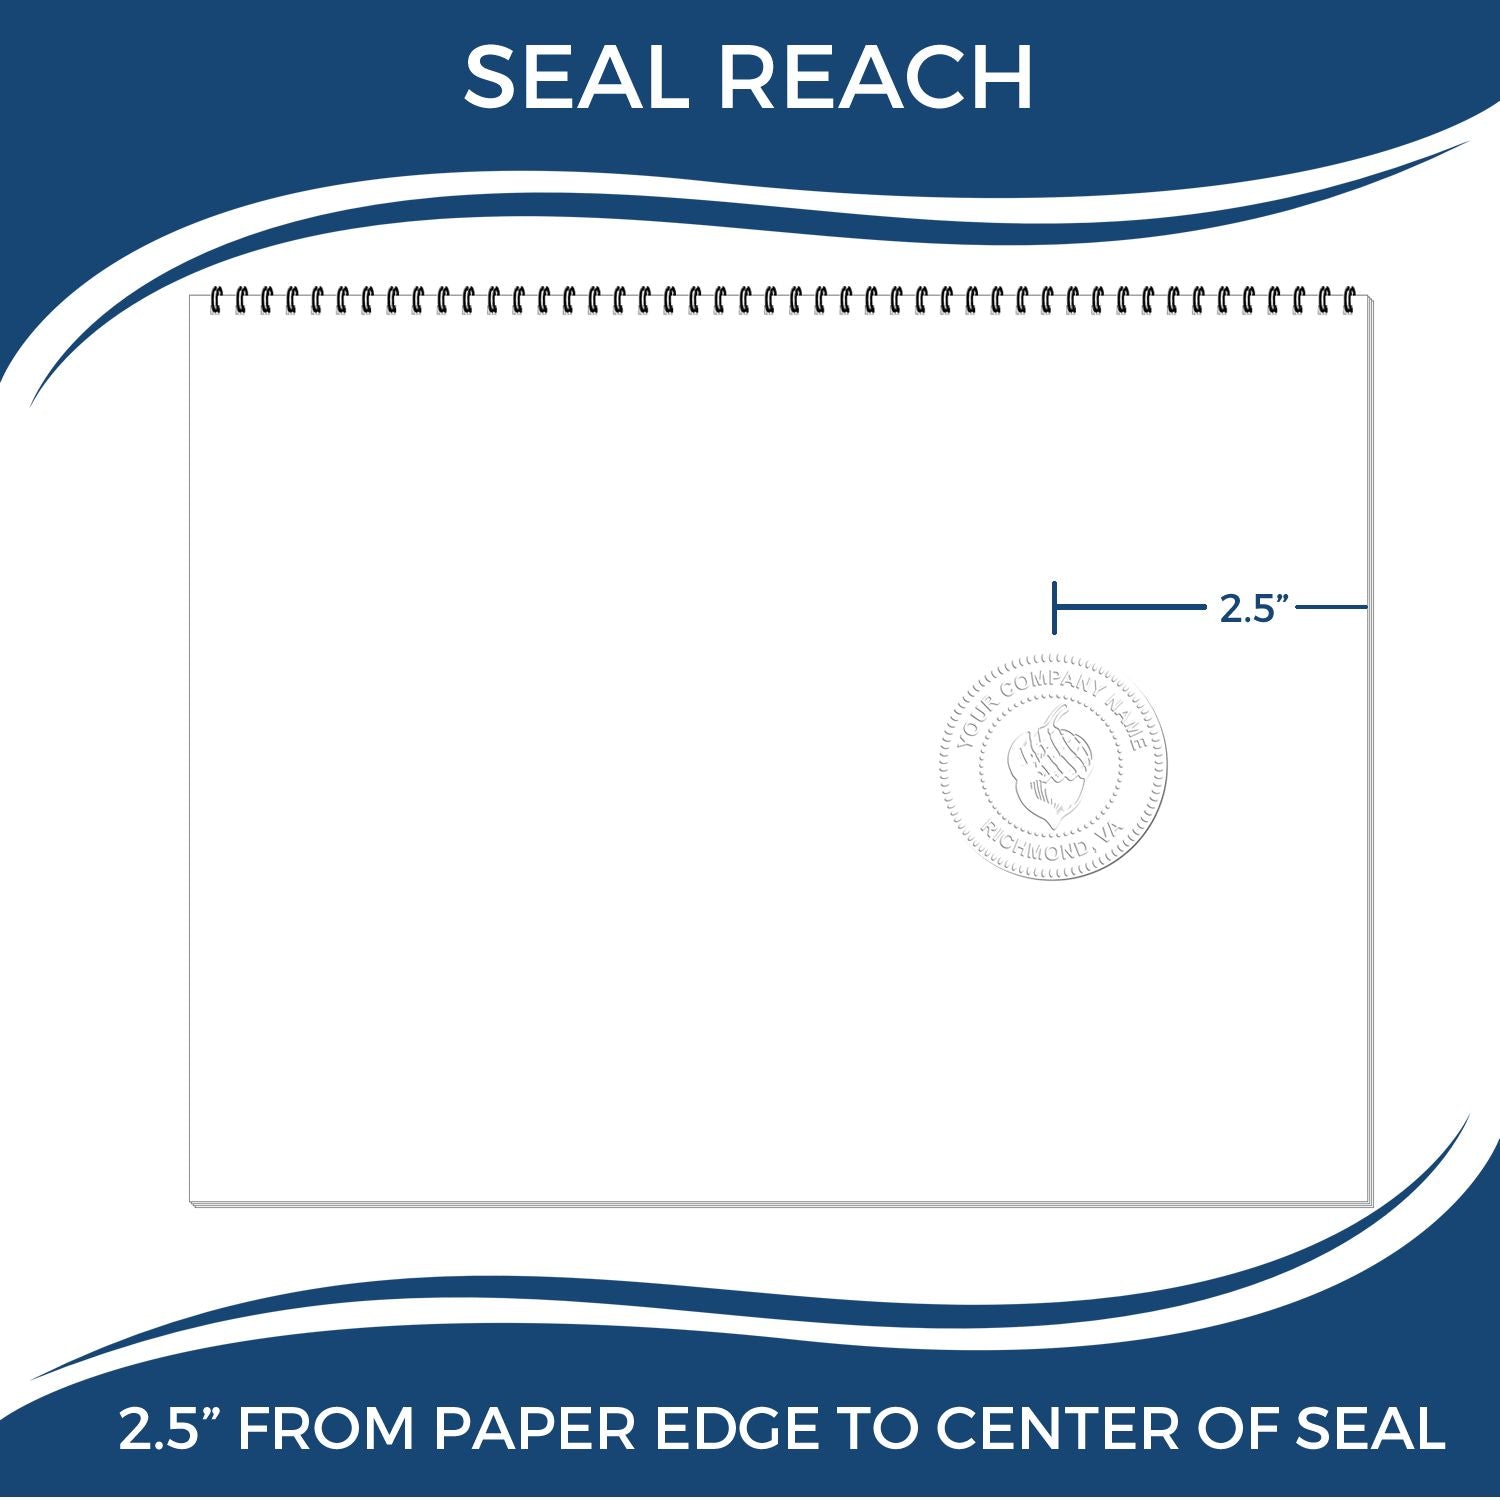 An infographic showing the seal reach which is represented by a ruler and a miniature seal image of the Alabama Long Reach Landscape Architect Embossing Stamp